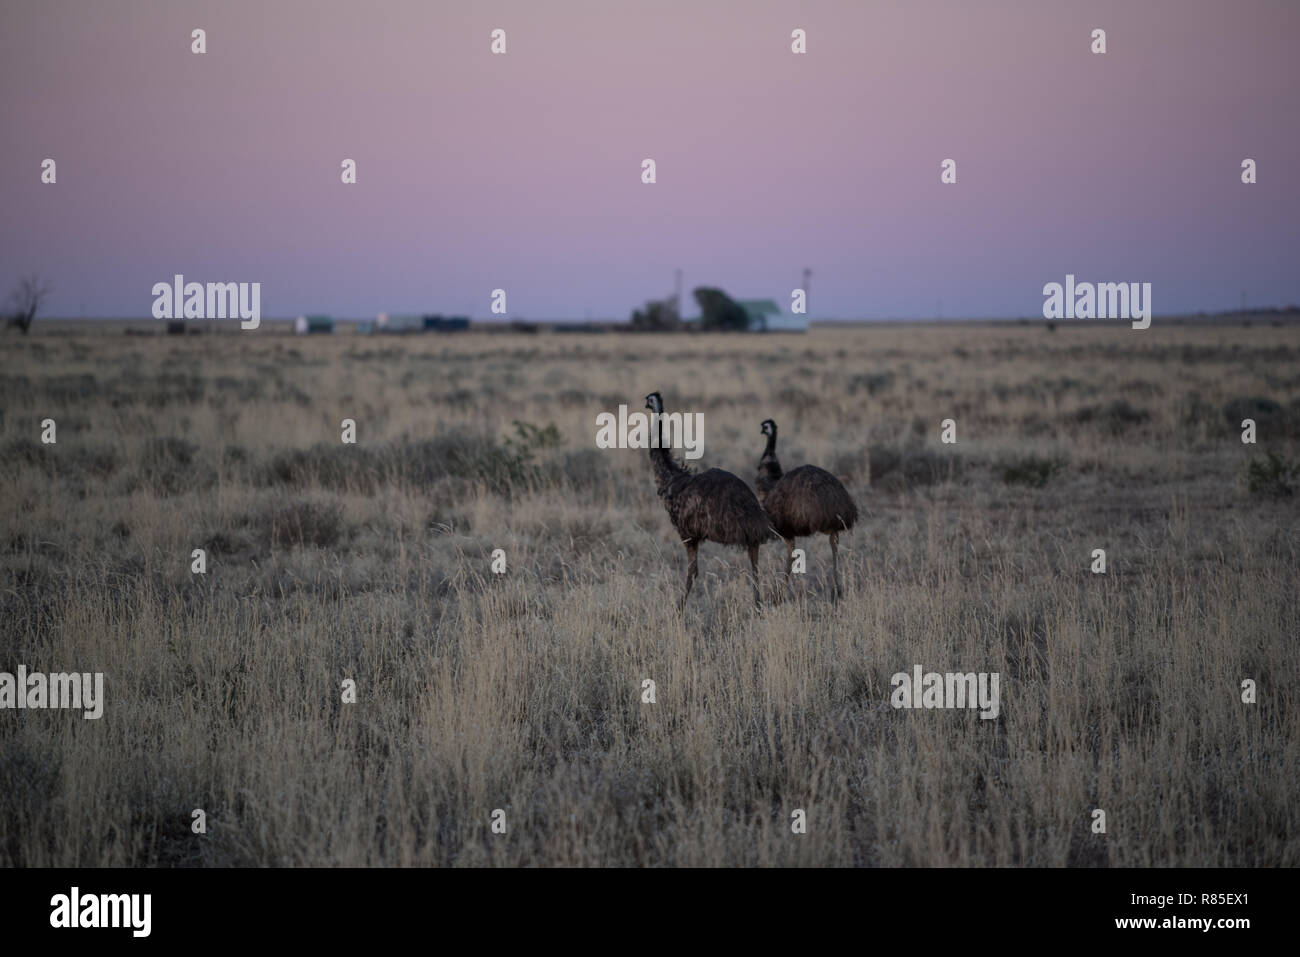 Two emus walk through an outback landscape near Winton, QLD Stock Photo